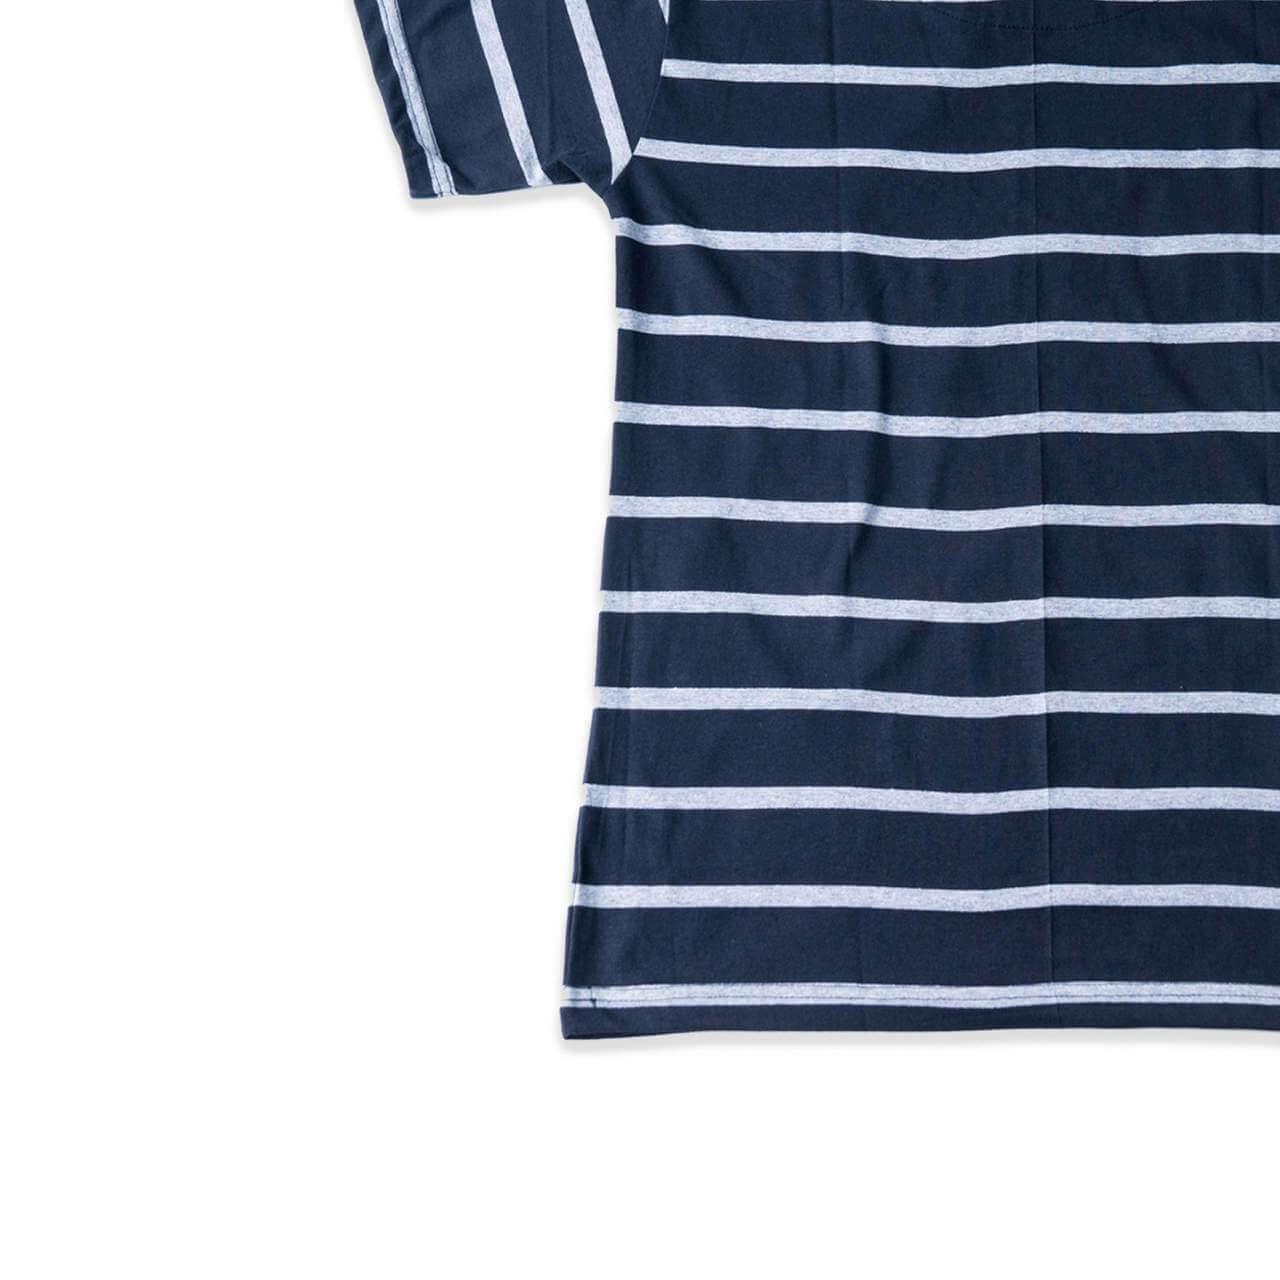 The Stripe Edit - Navy (Slim Fit) - Oneforblue